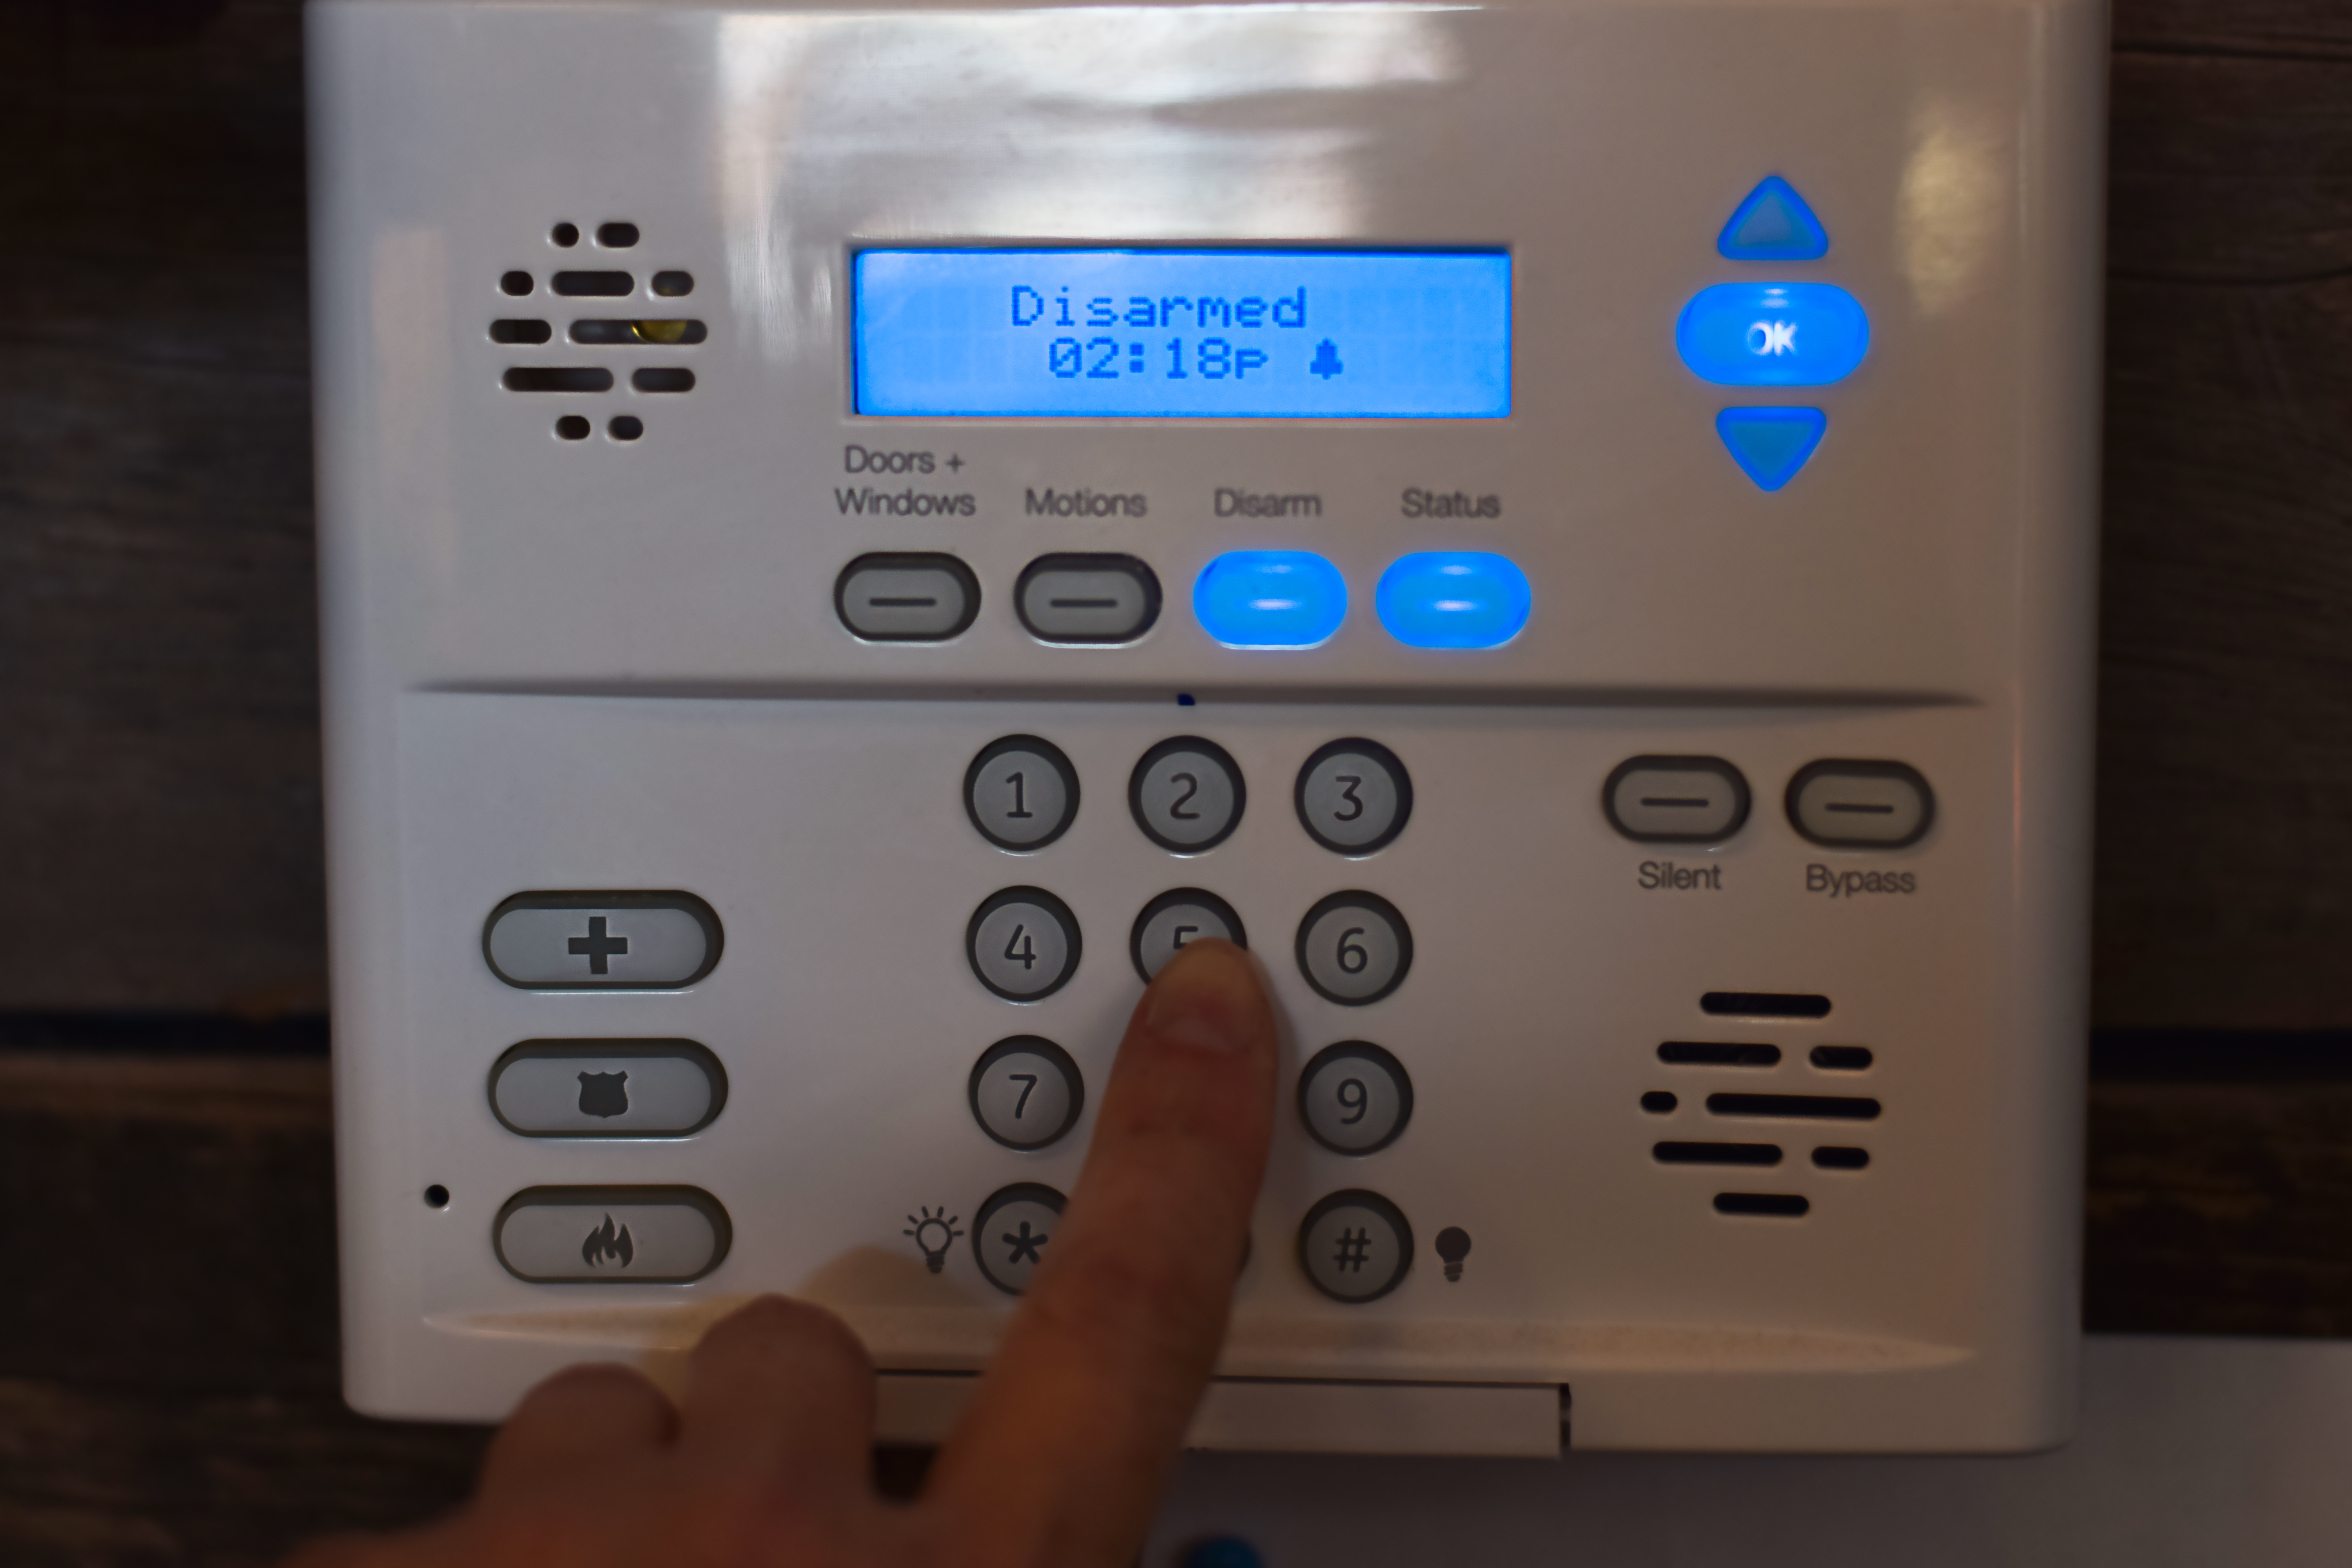 Simplisafe Home Security Systems in Garland Texas | Monitored Service